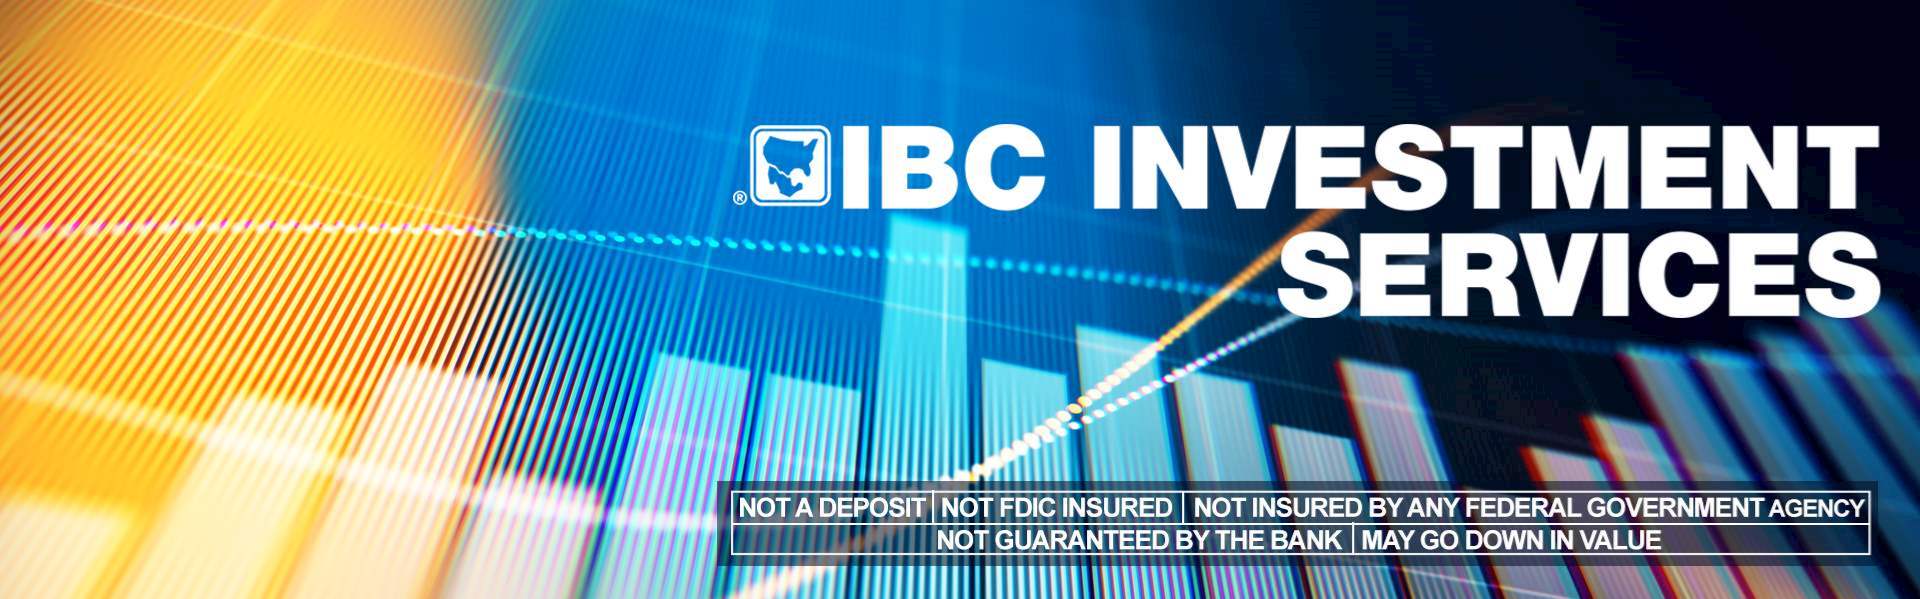 IBC Bank Personal Investments